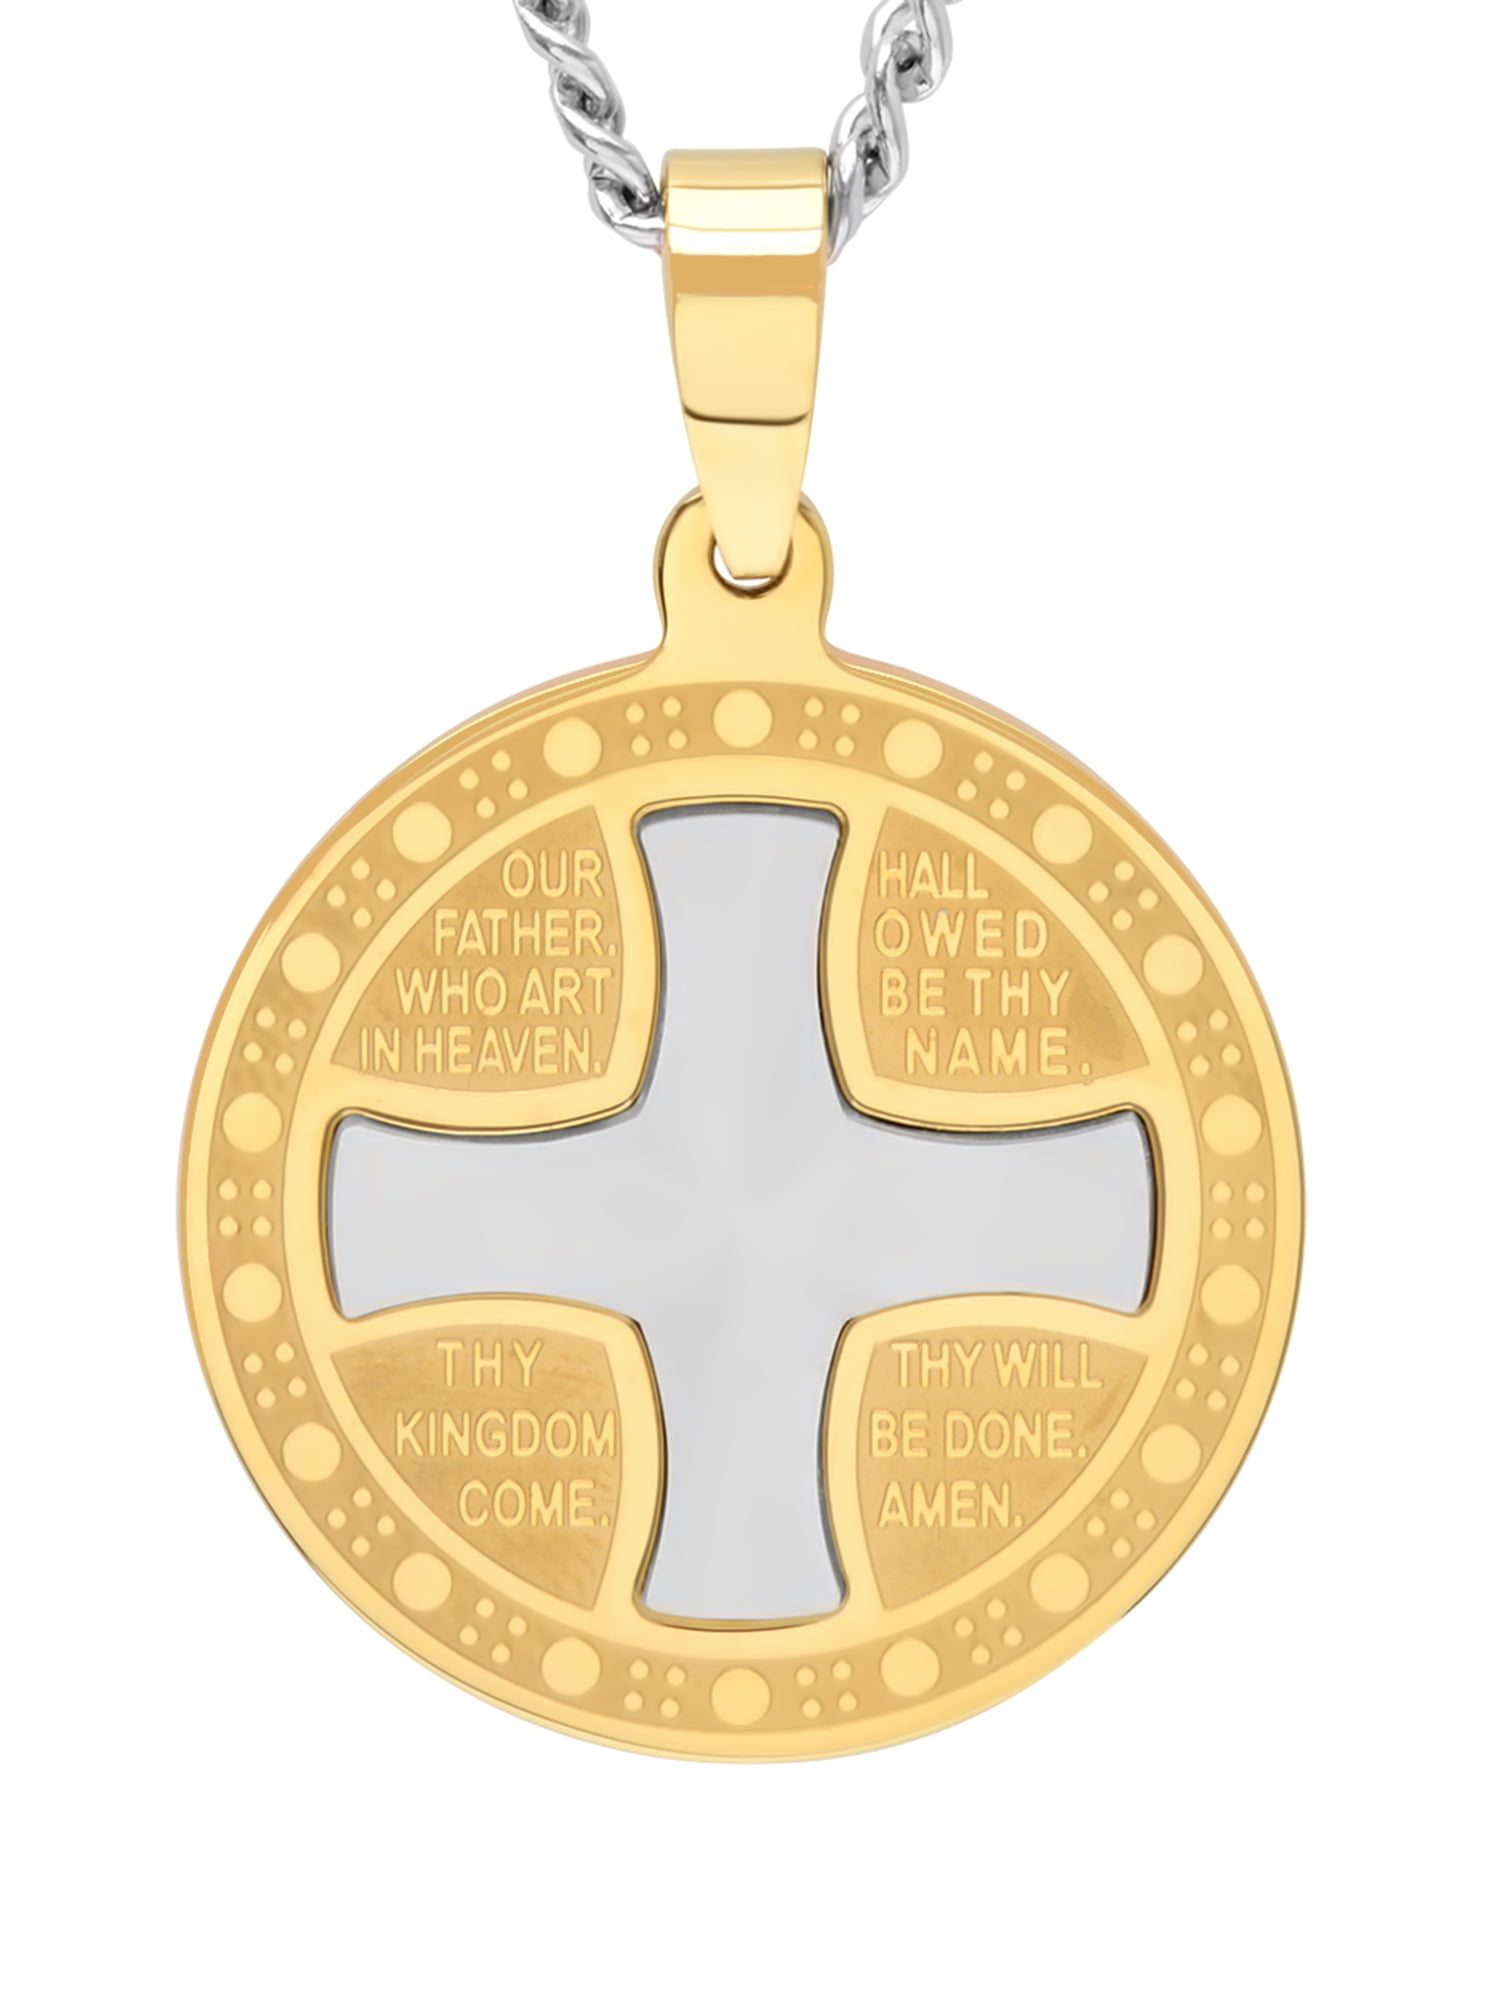 24" Men's Prayer & Crucifix Pendant in Two-Tone Stainless Steel 